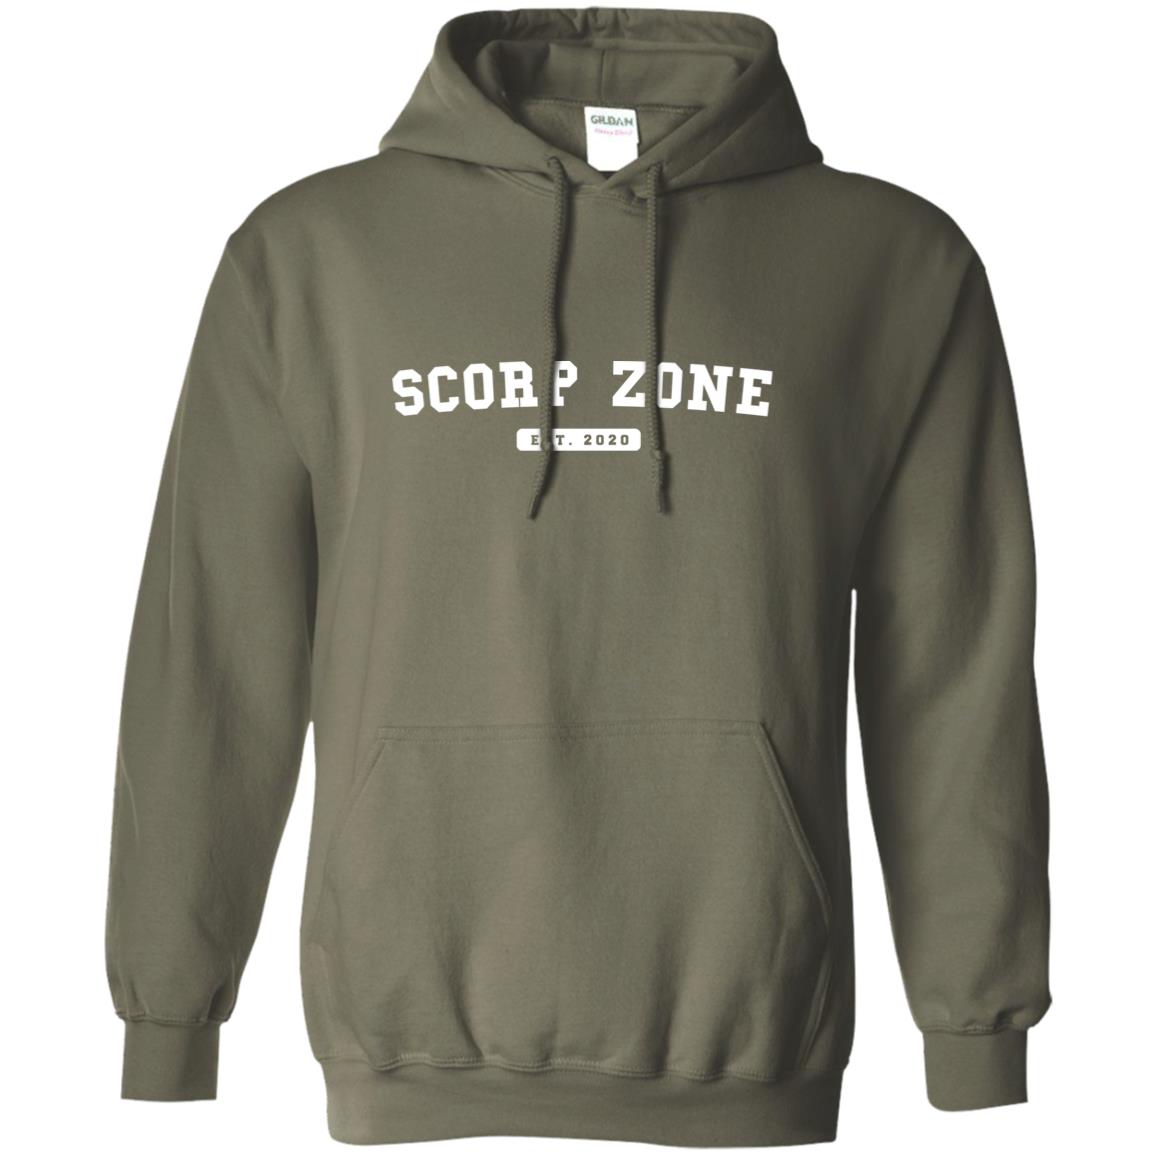 Pullover Hoodie - Karma Is Only A Bitch If You Are - Design On Back - White Letters -Scorp Zone EST Logo On Front